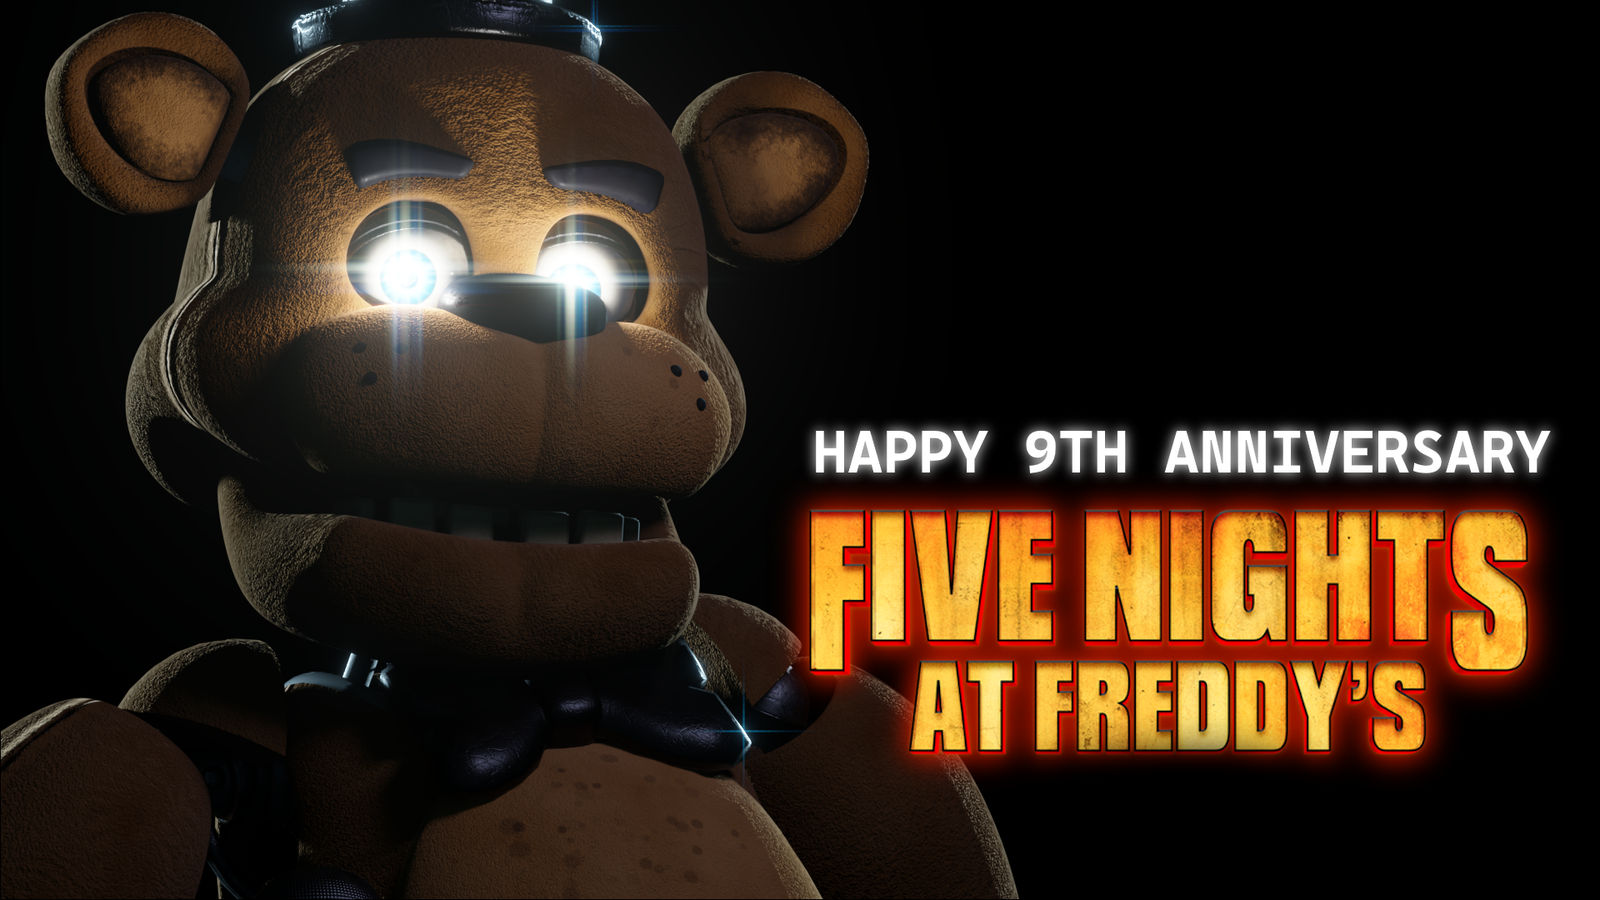 Happy 3 Years Anniversary to my favorite FNaF Game! : r